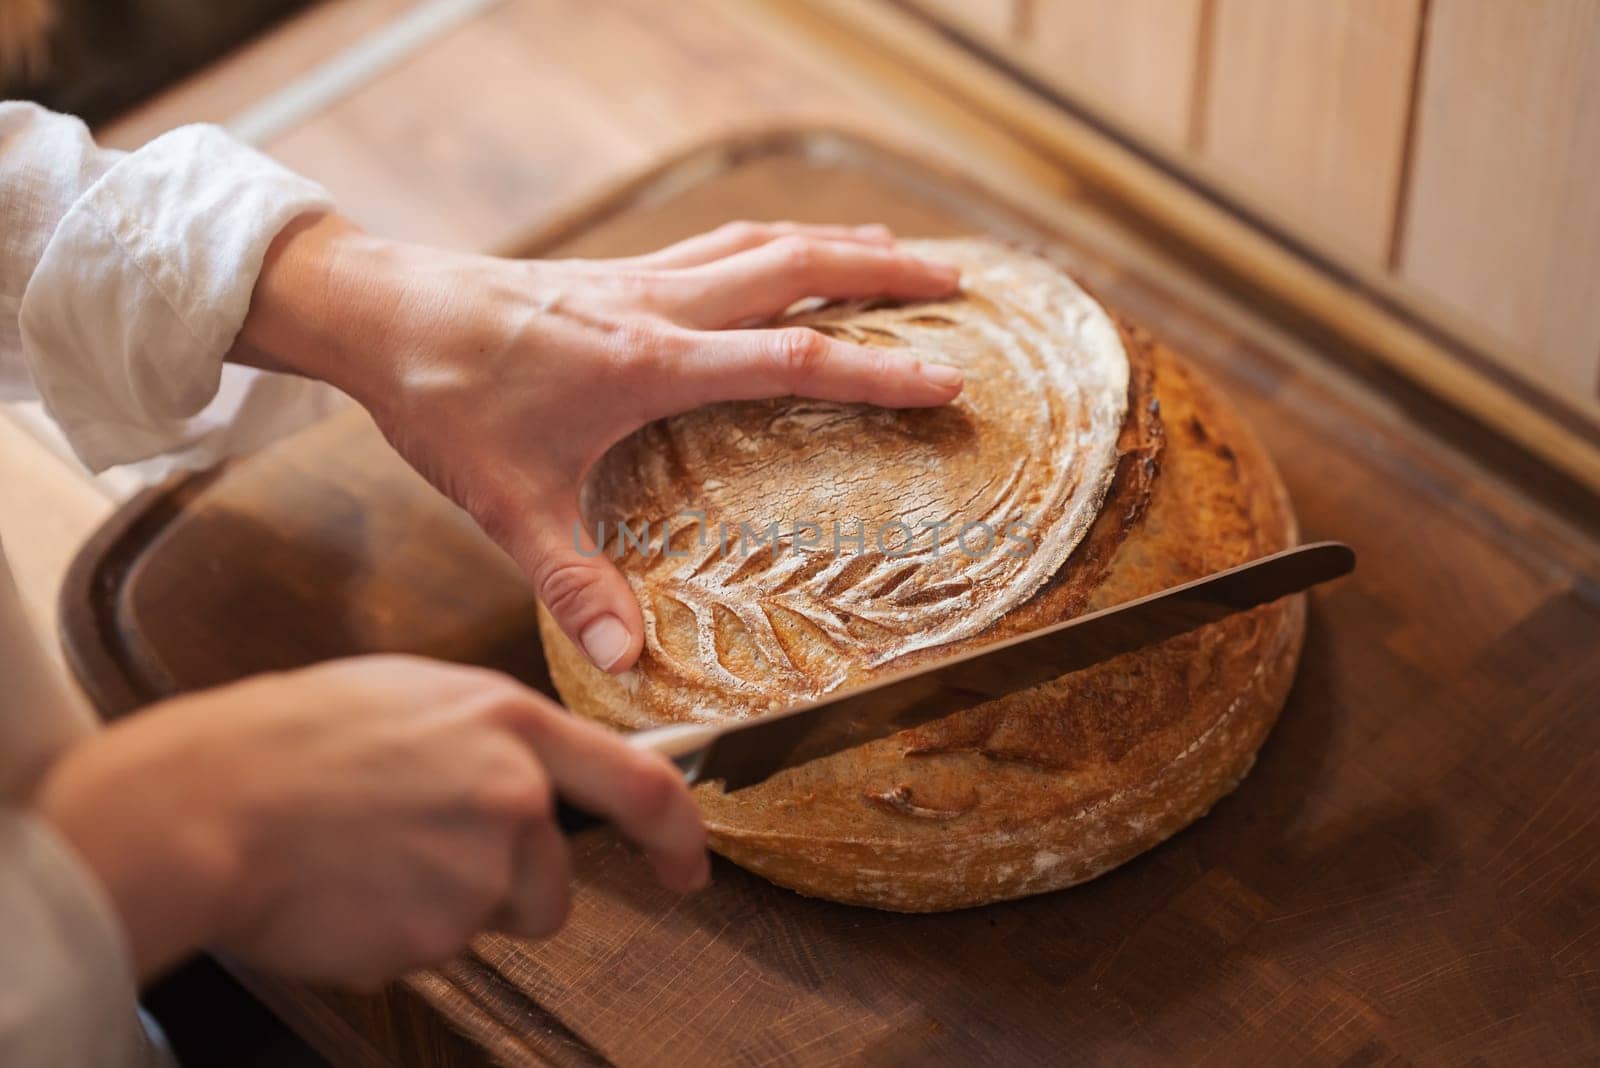 Female hands with a knife, starting to cut the fresh loaf of bread, close up